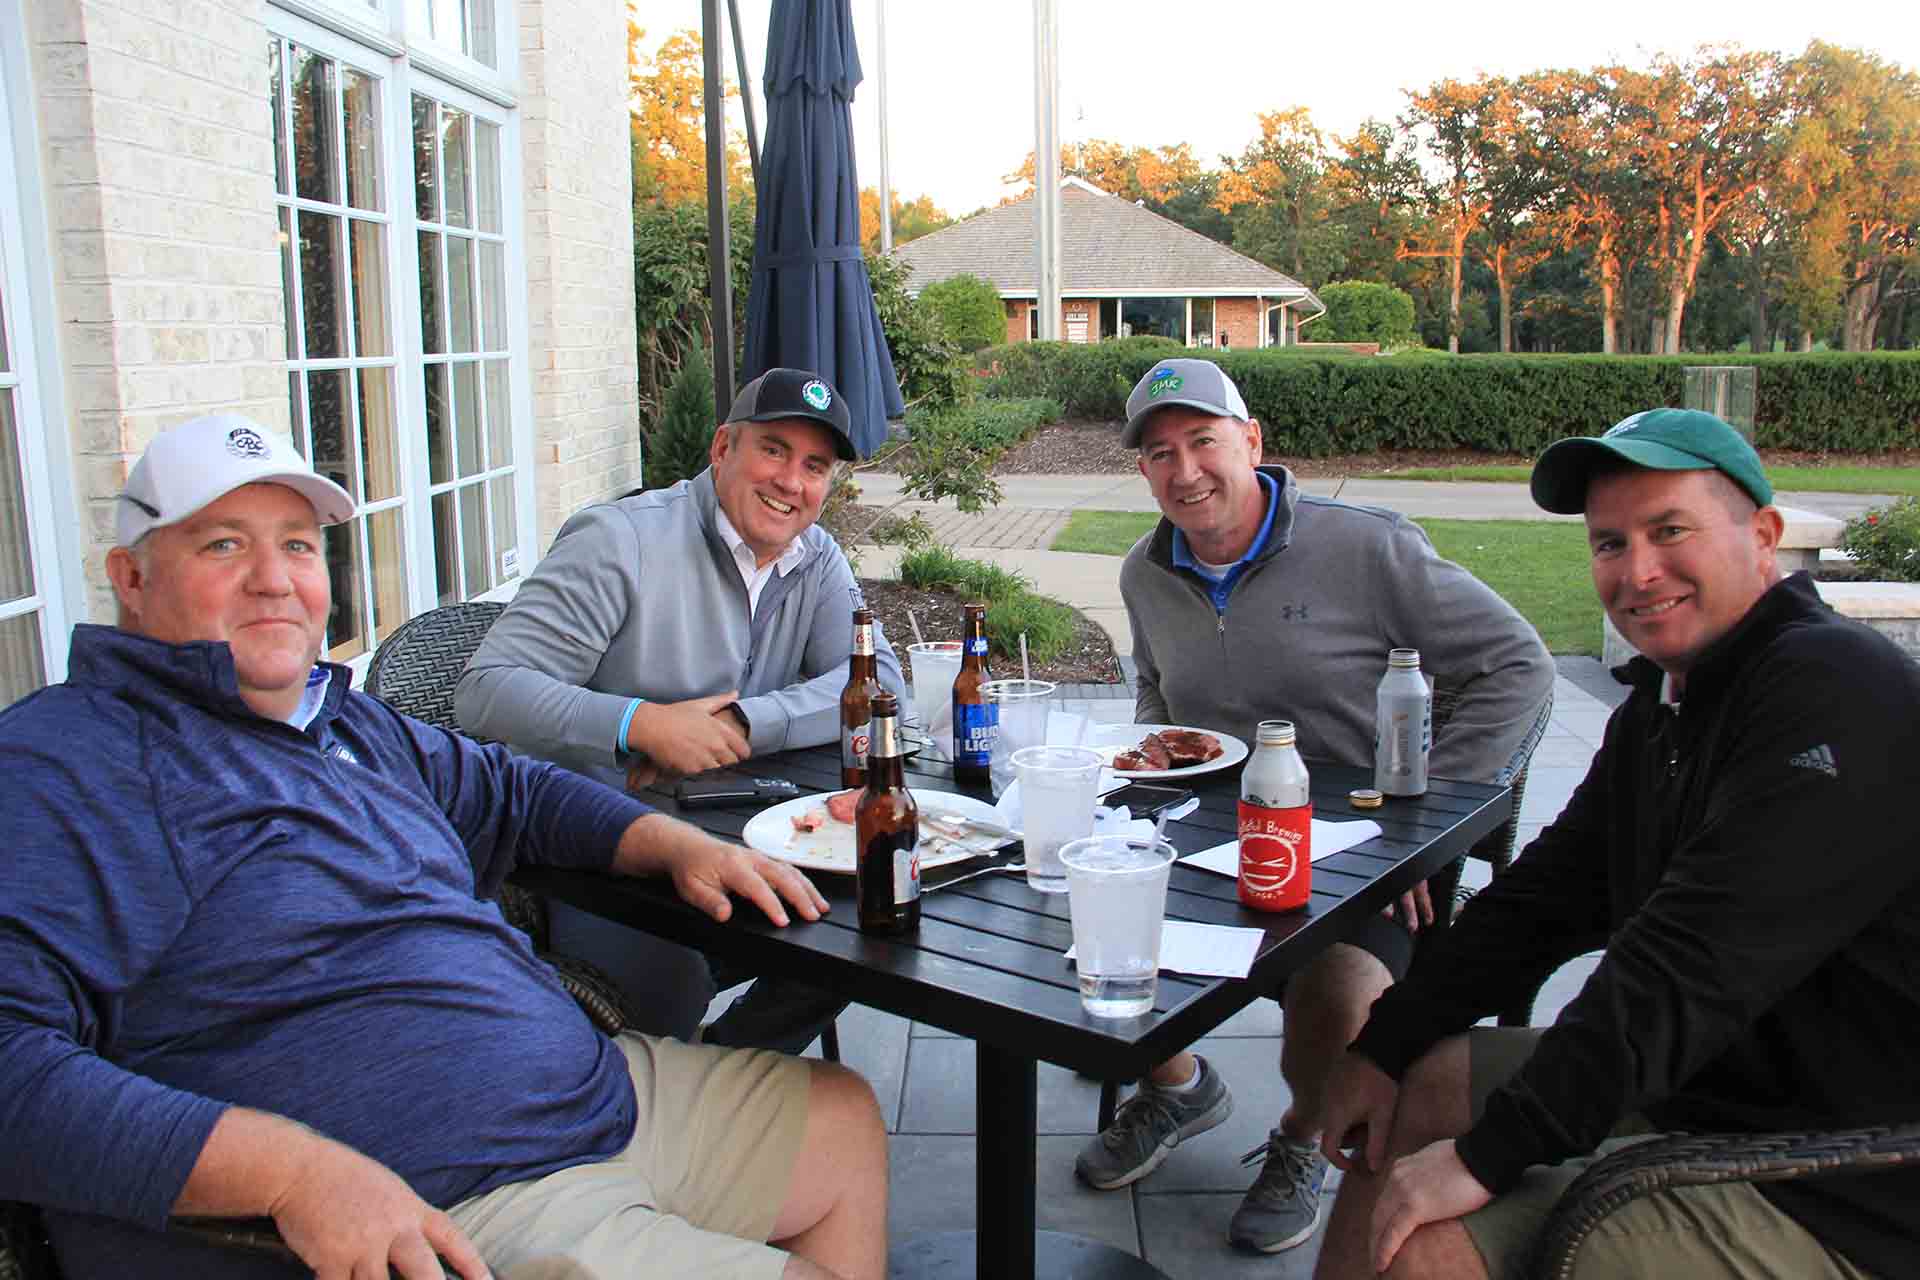 2022-Endowment-Golf-Classic-four-people-seated-at-smaller-table-smiling-for-photo